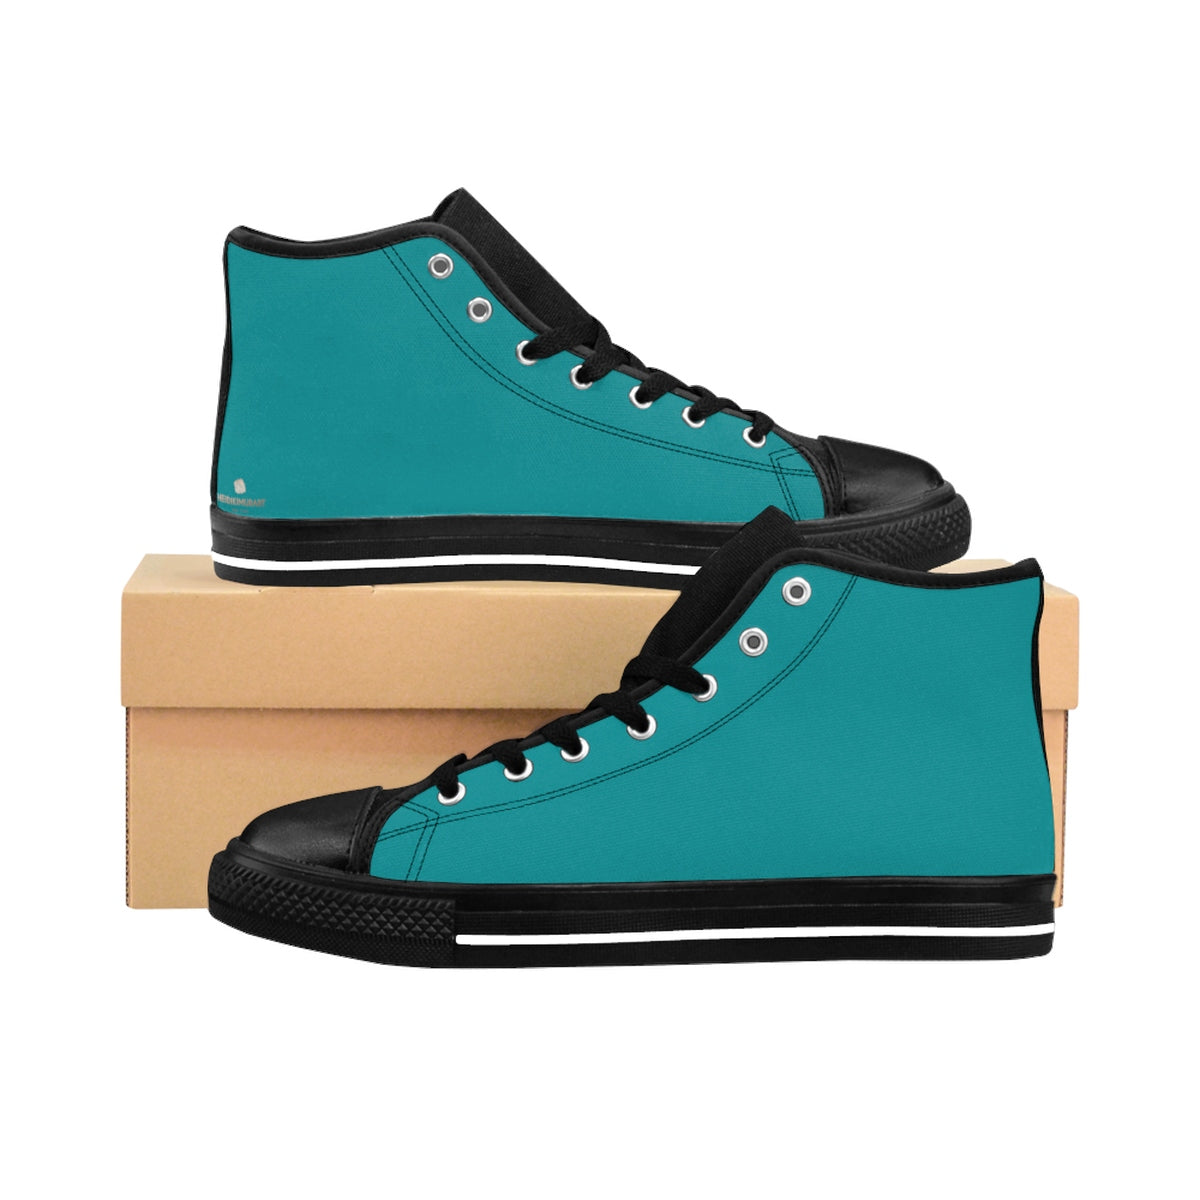 teal color shoes